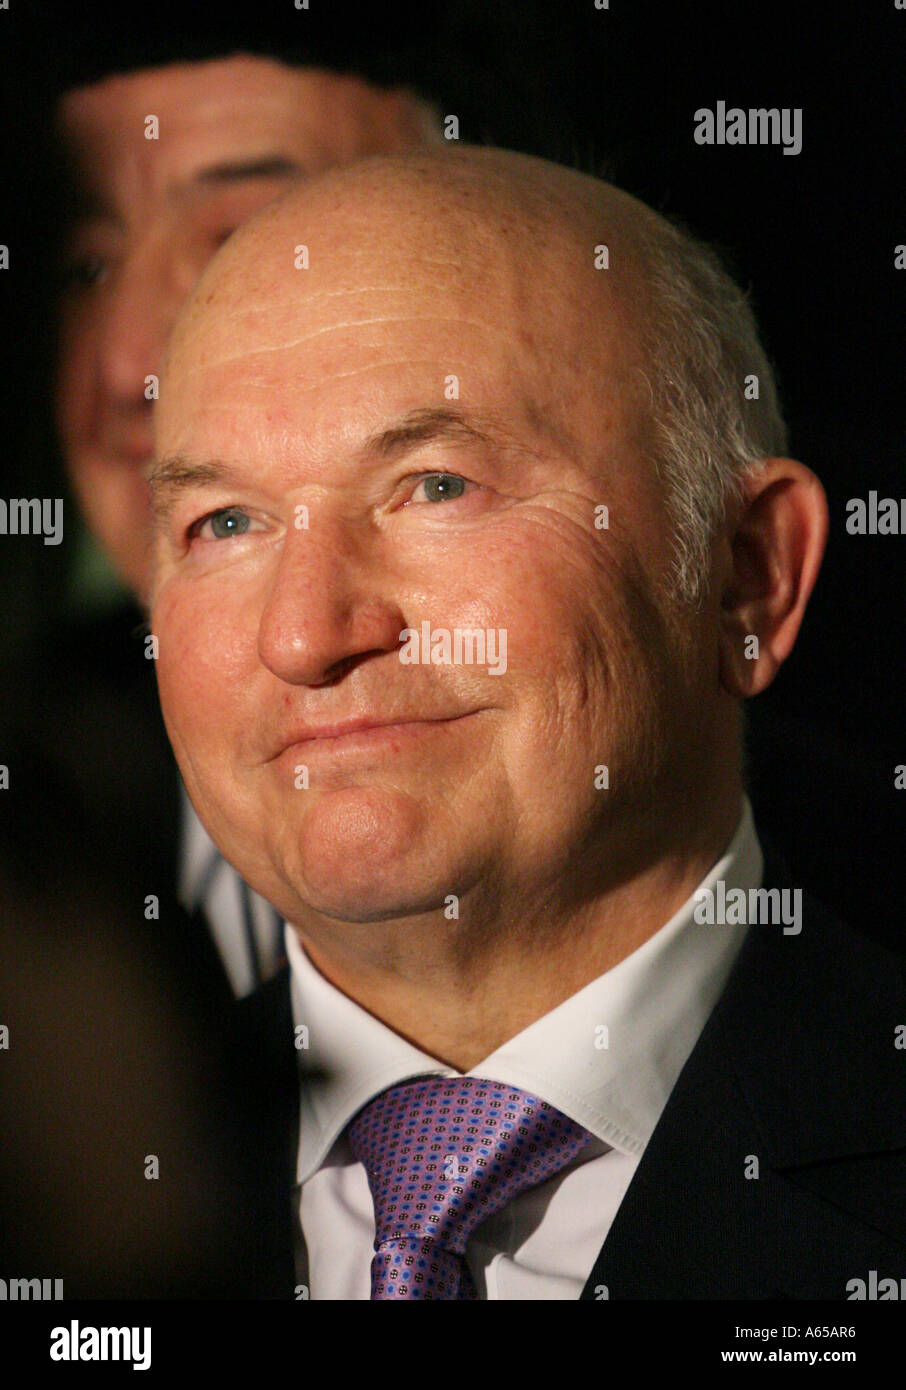 Yuri Luzhkov, Mayor of Moscow smiles during his visit to the Russian Winter Festival at Trafalgar Square. London, January 2006 Stock Photo